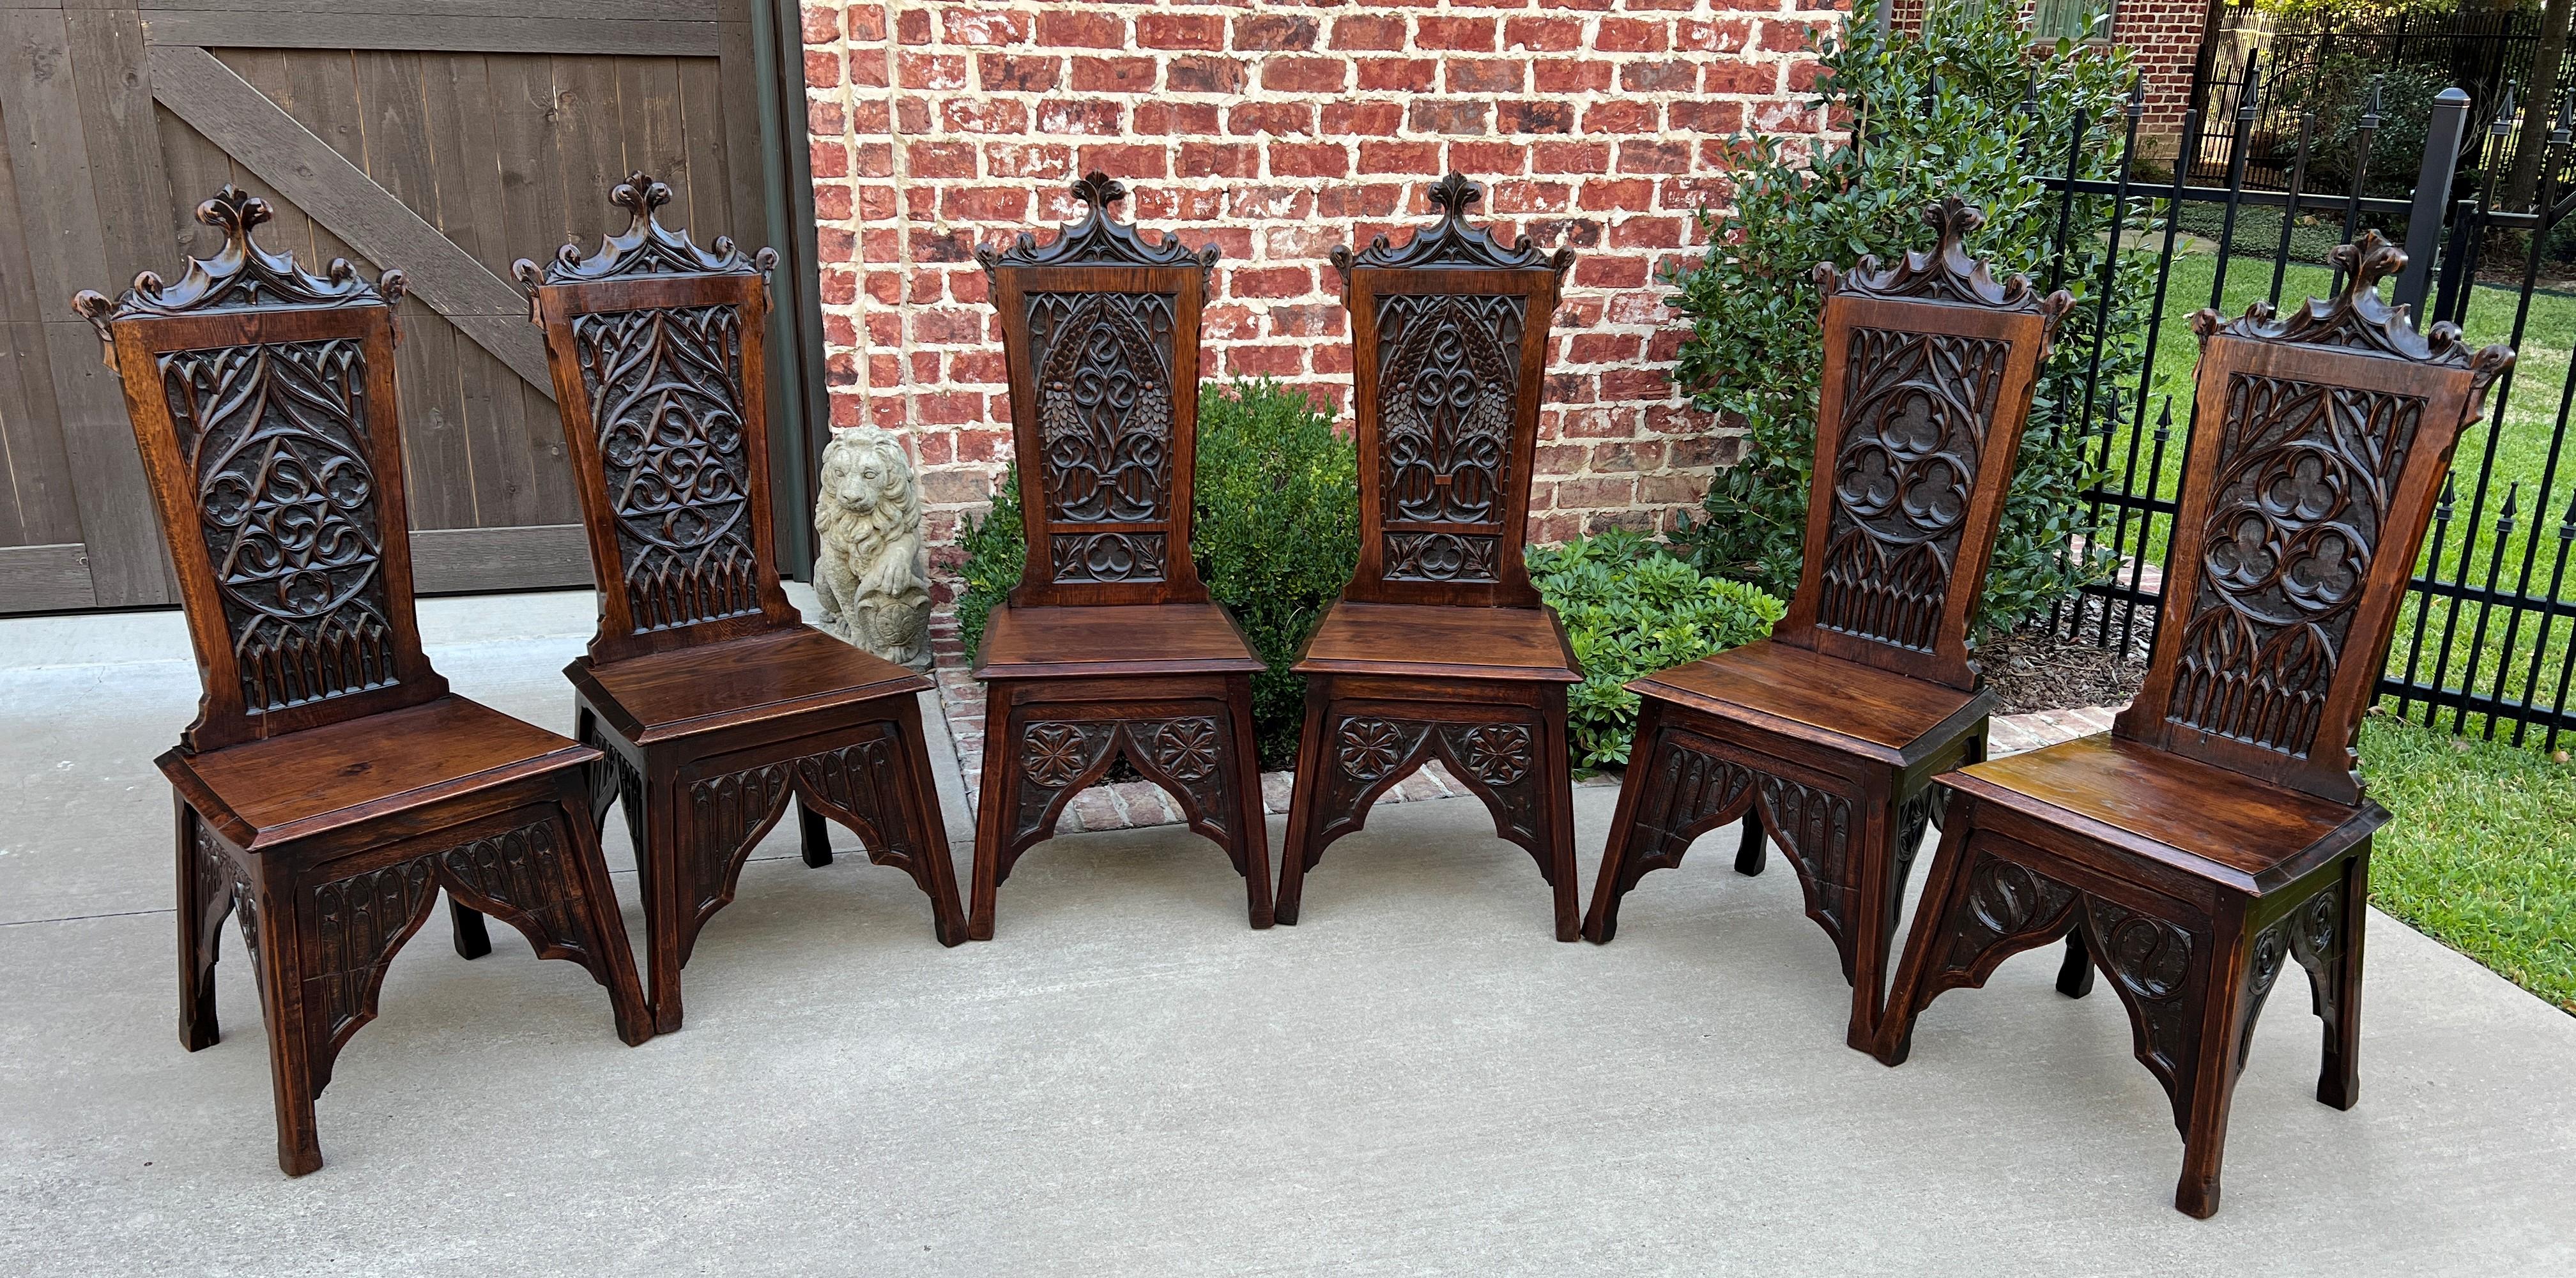 Antique French Chairs Set of 6 Gothic Revival Oak Pegged Dining Side Chairs 19C 8